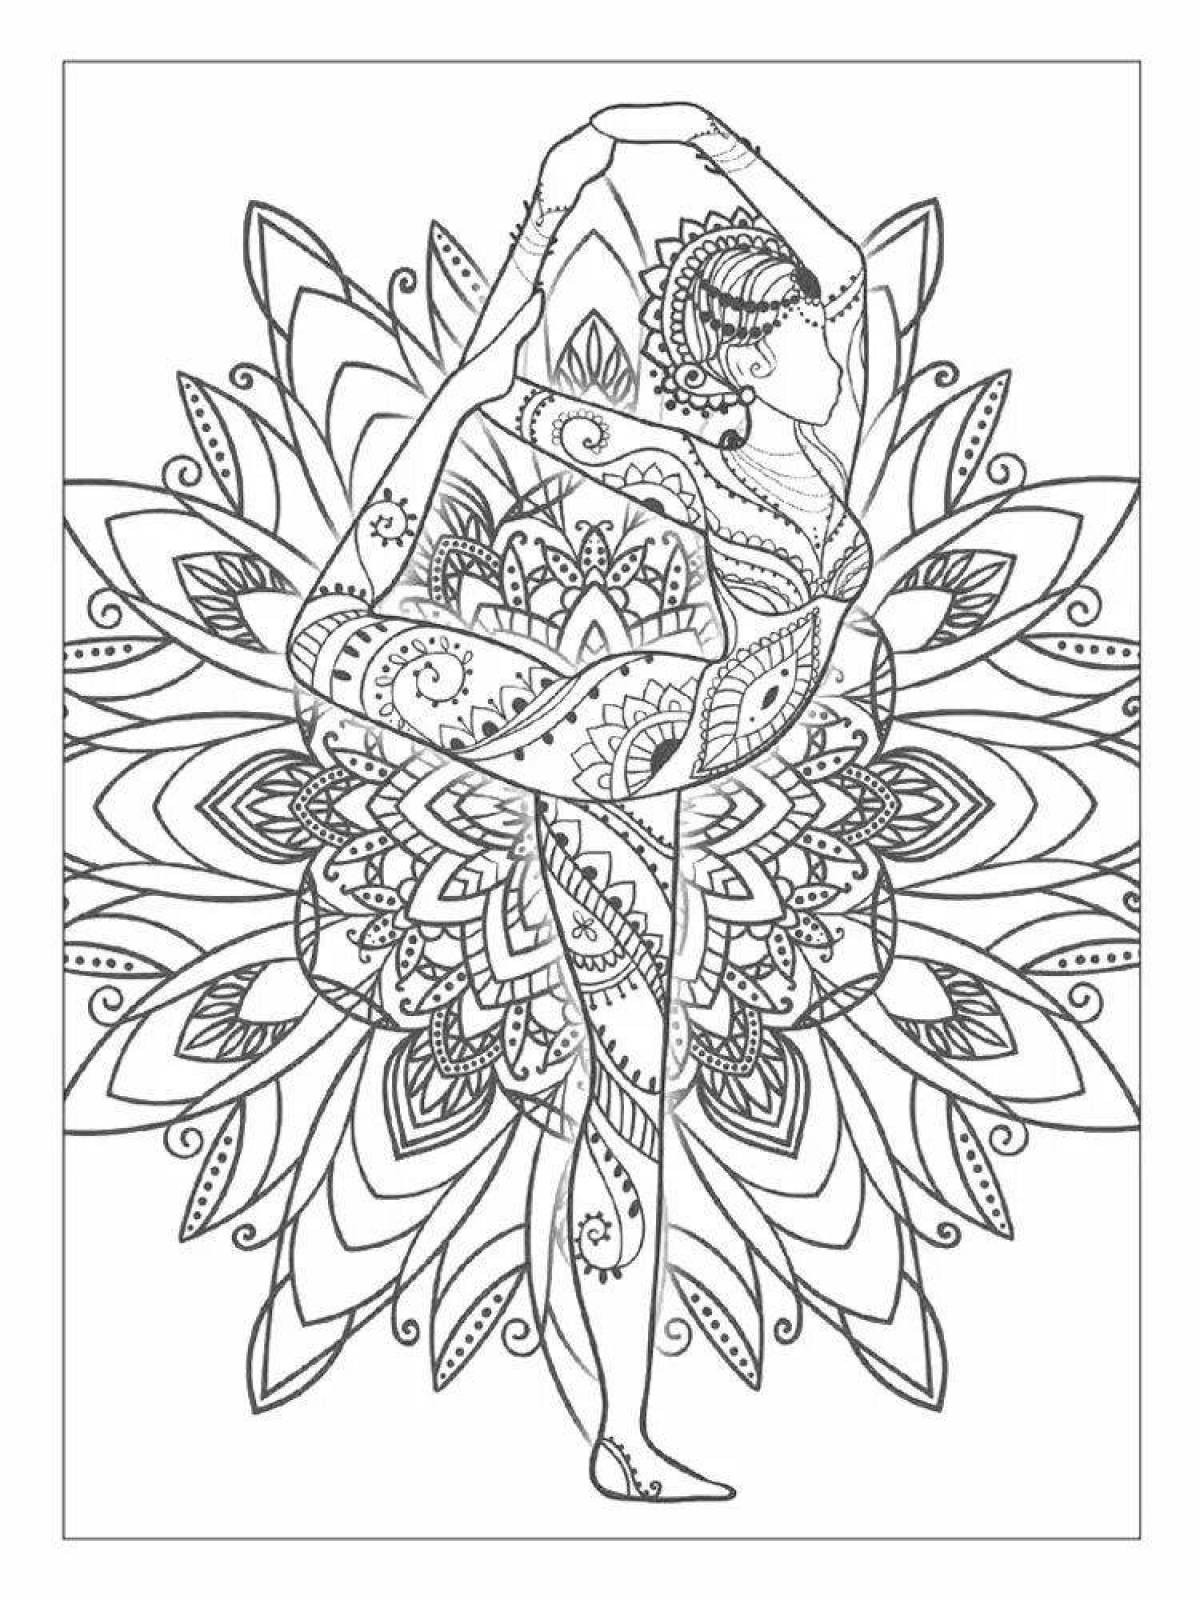 Coloring book for meditation